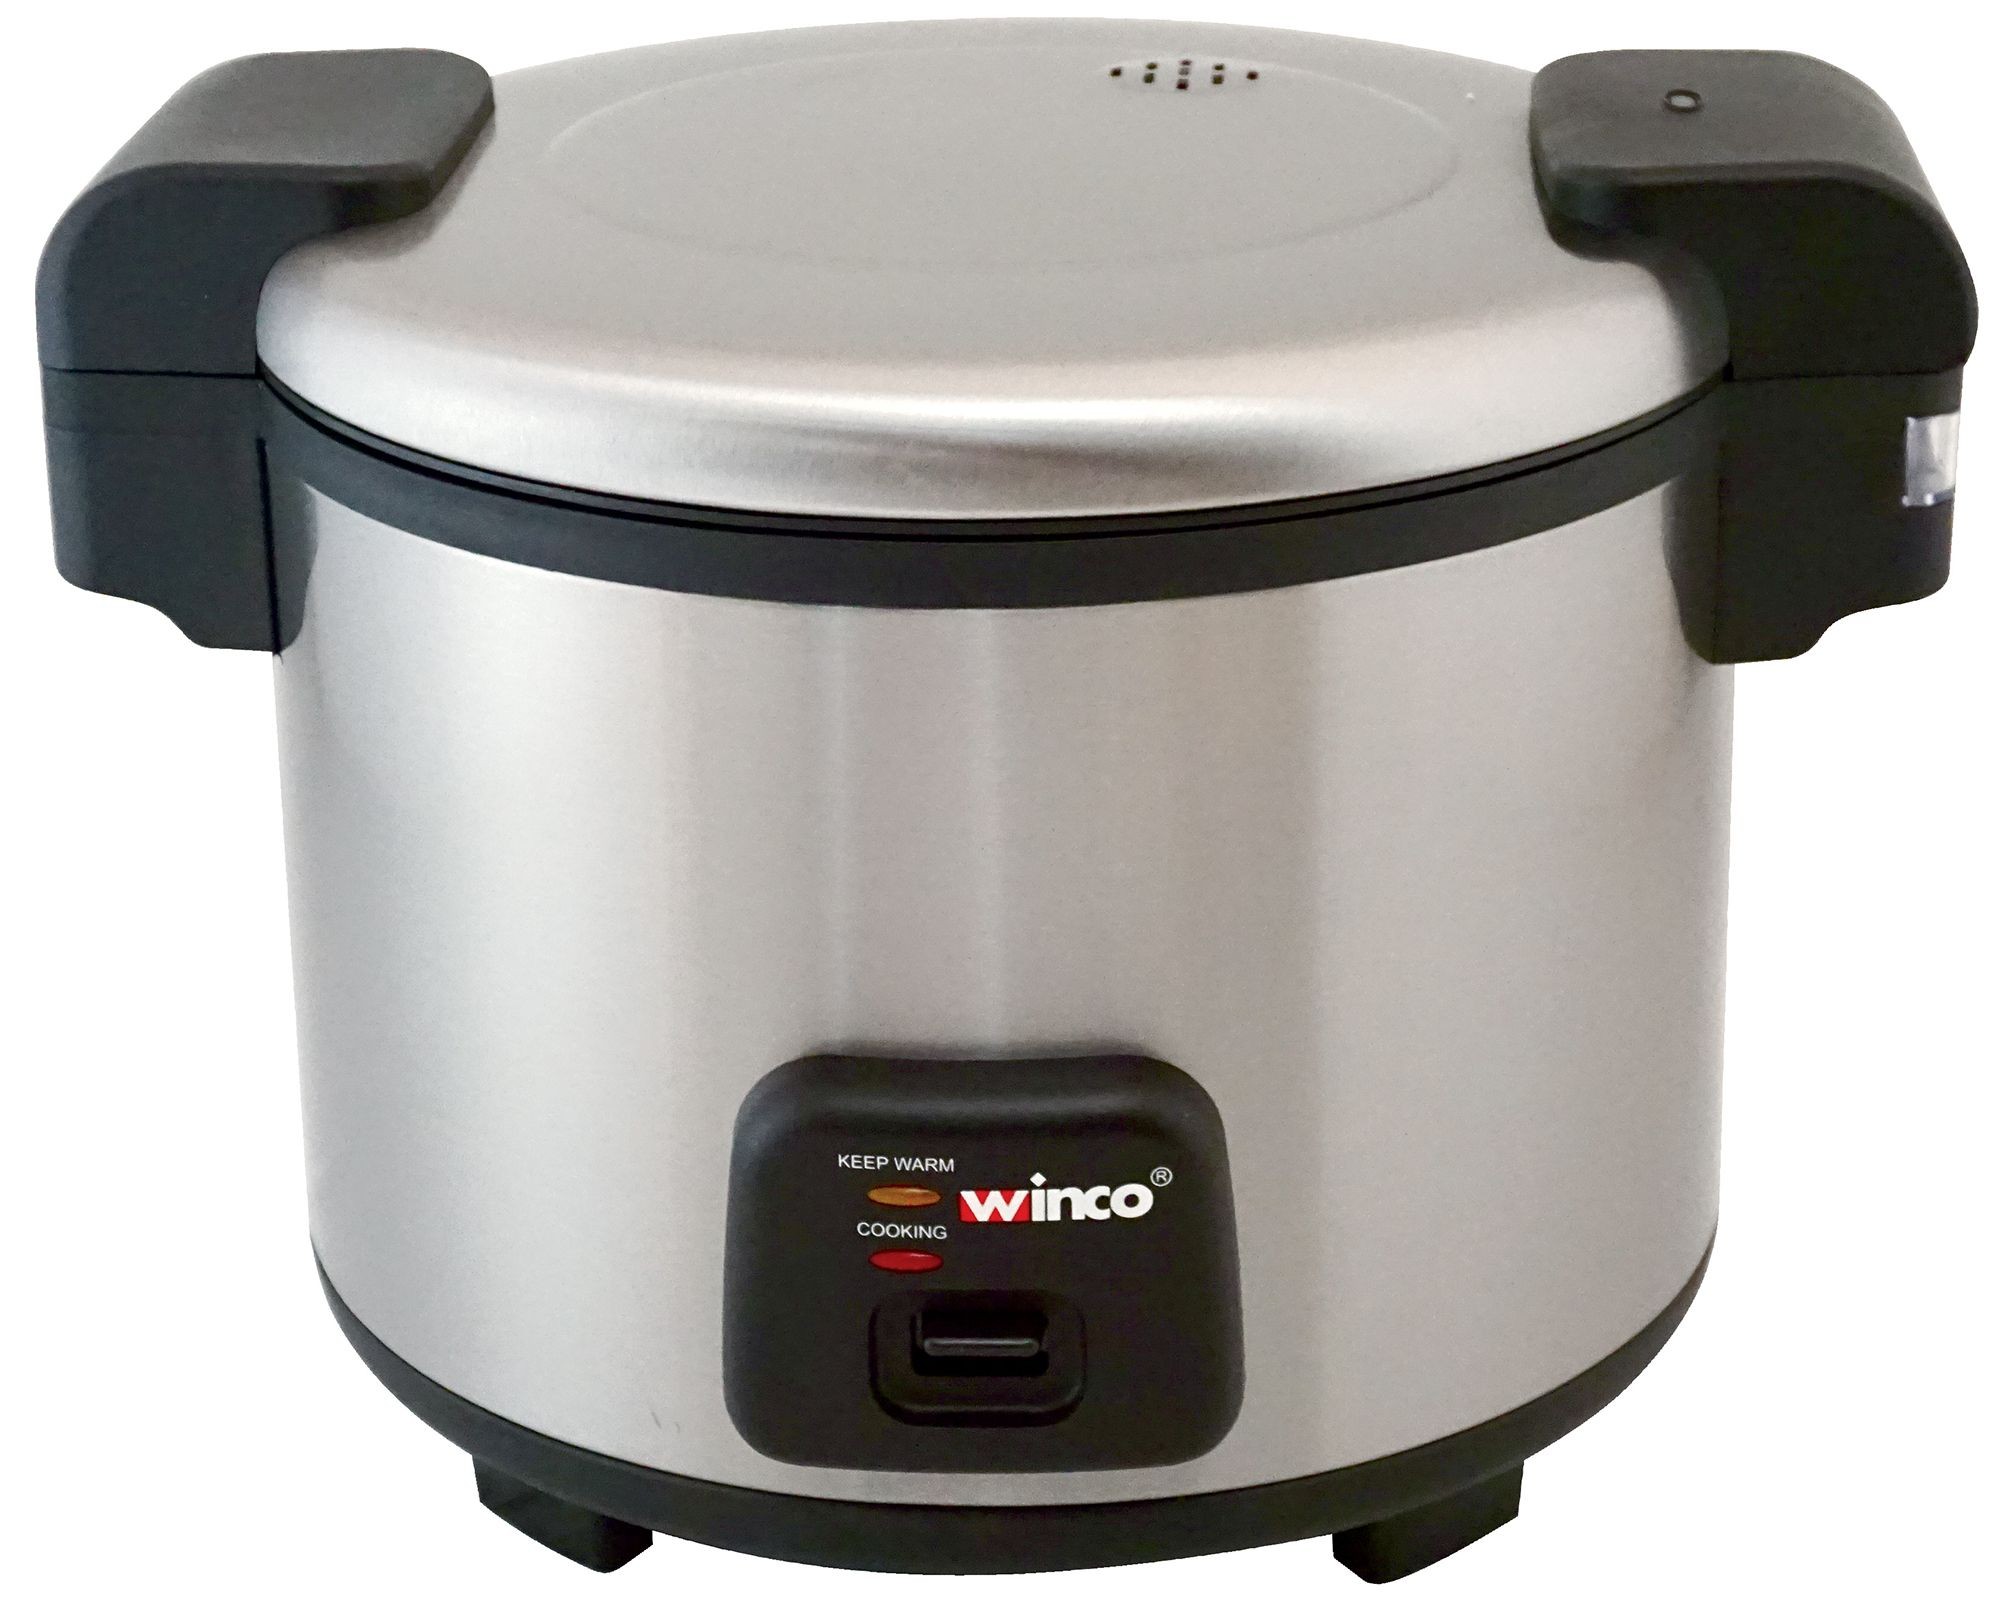 https://www.lionsdeal.com/itempics/Advanced-Electric-Rice-Cooker-Warmer-with-Hinged-Cover-32158_xlarge.jpg